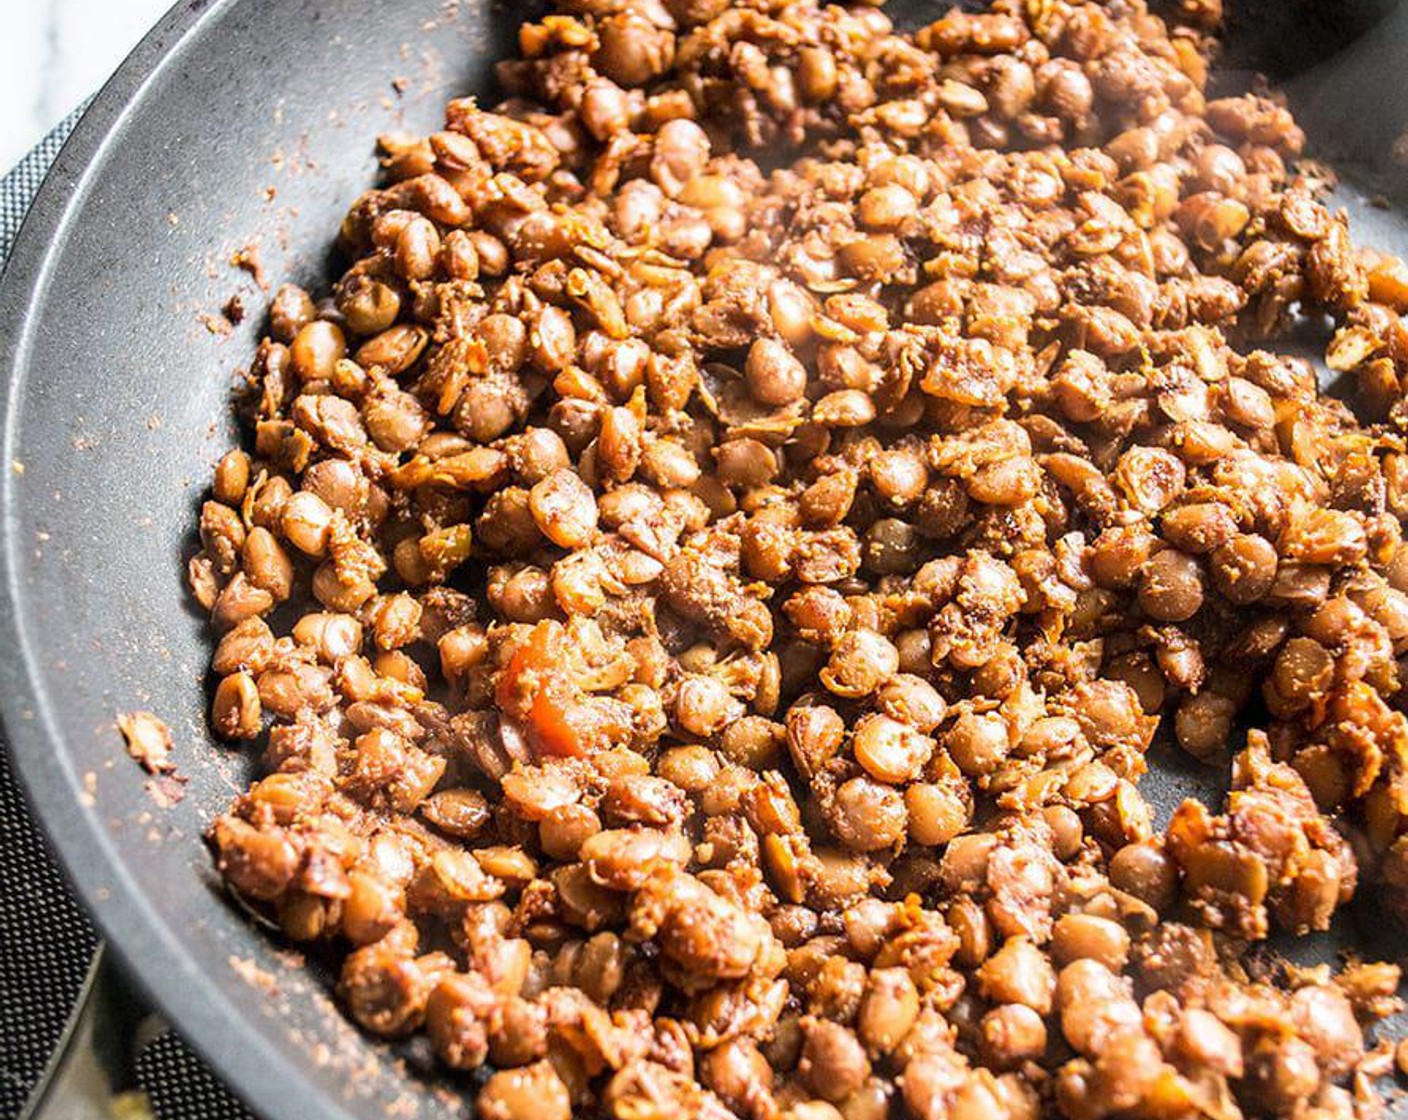 step 5 Once lentils are warm, taste to check seasonings and add more to your preference.